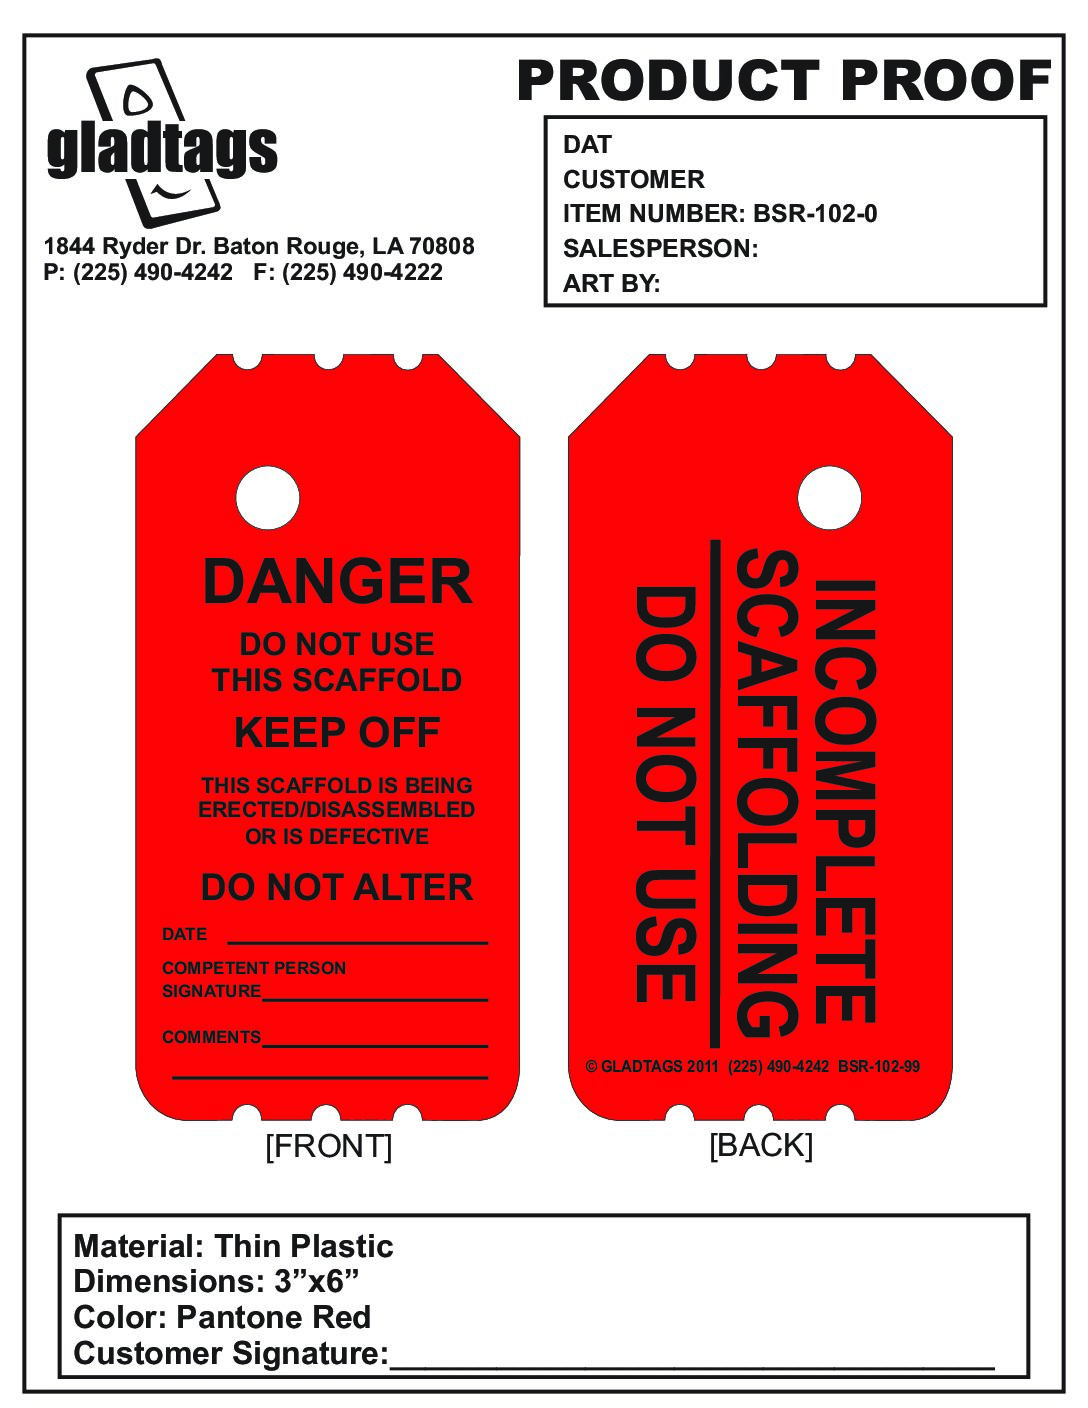 3.25X6 Red Laminated Insert Danger Do Not Use Scaffold Keep Off – BSR-102-0